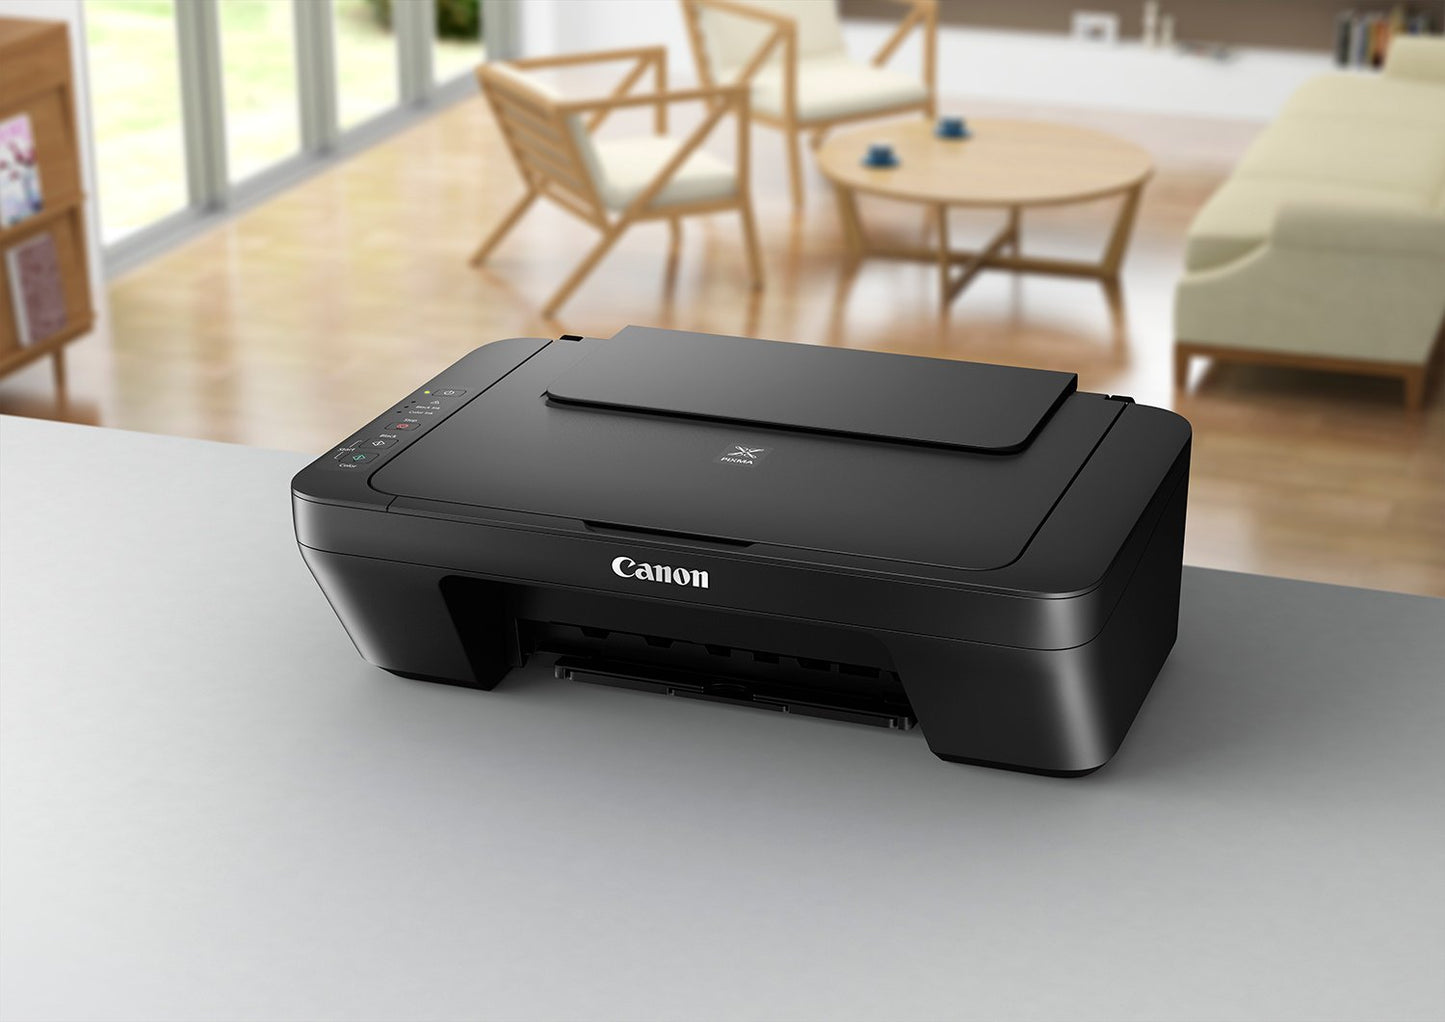 Canon PIXMA MG2550S All-in-One Printer Colour Inkjet Multifunction Copier Scanner